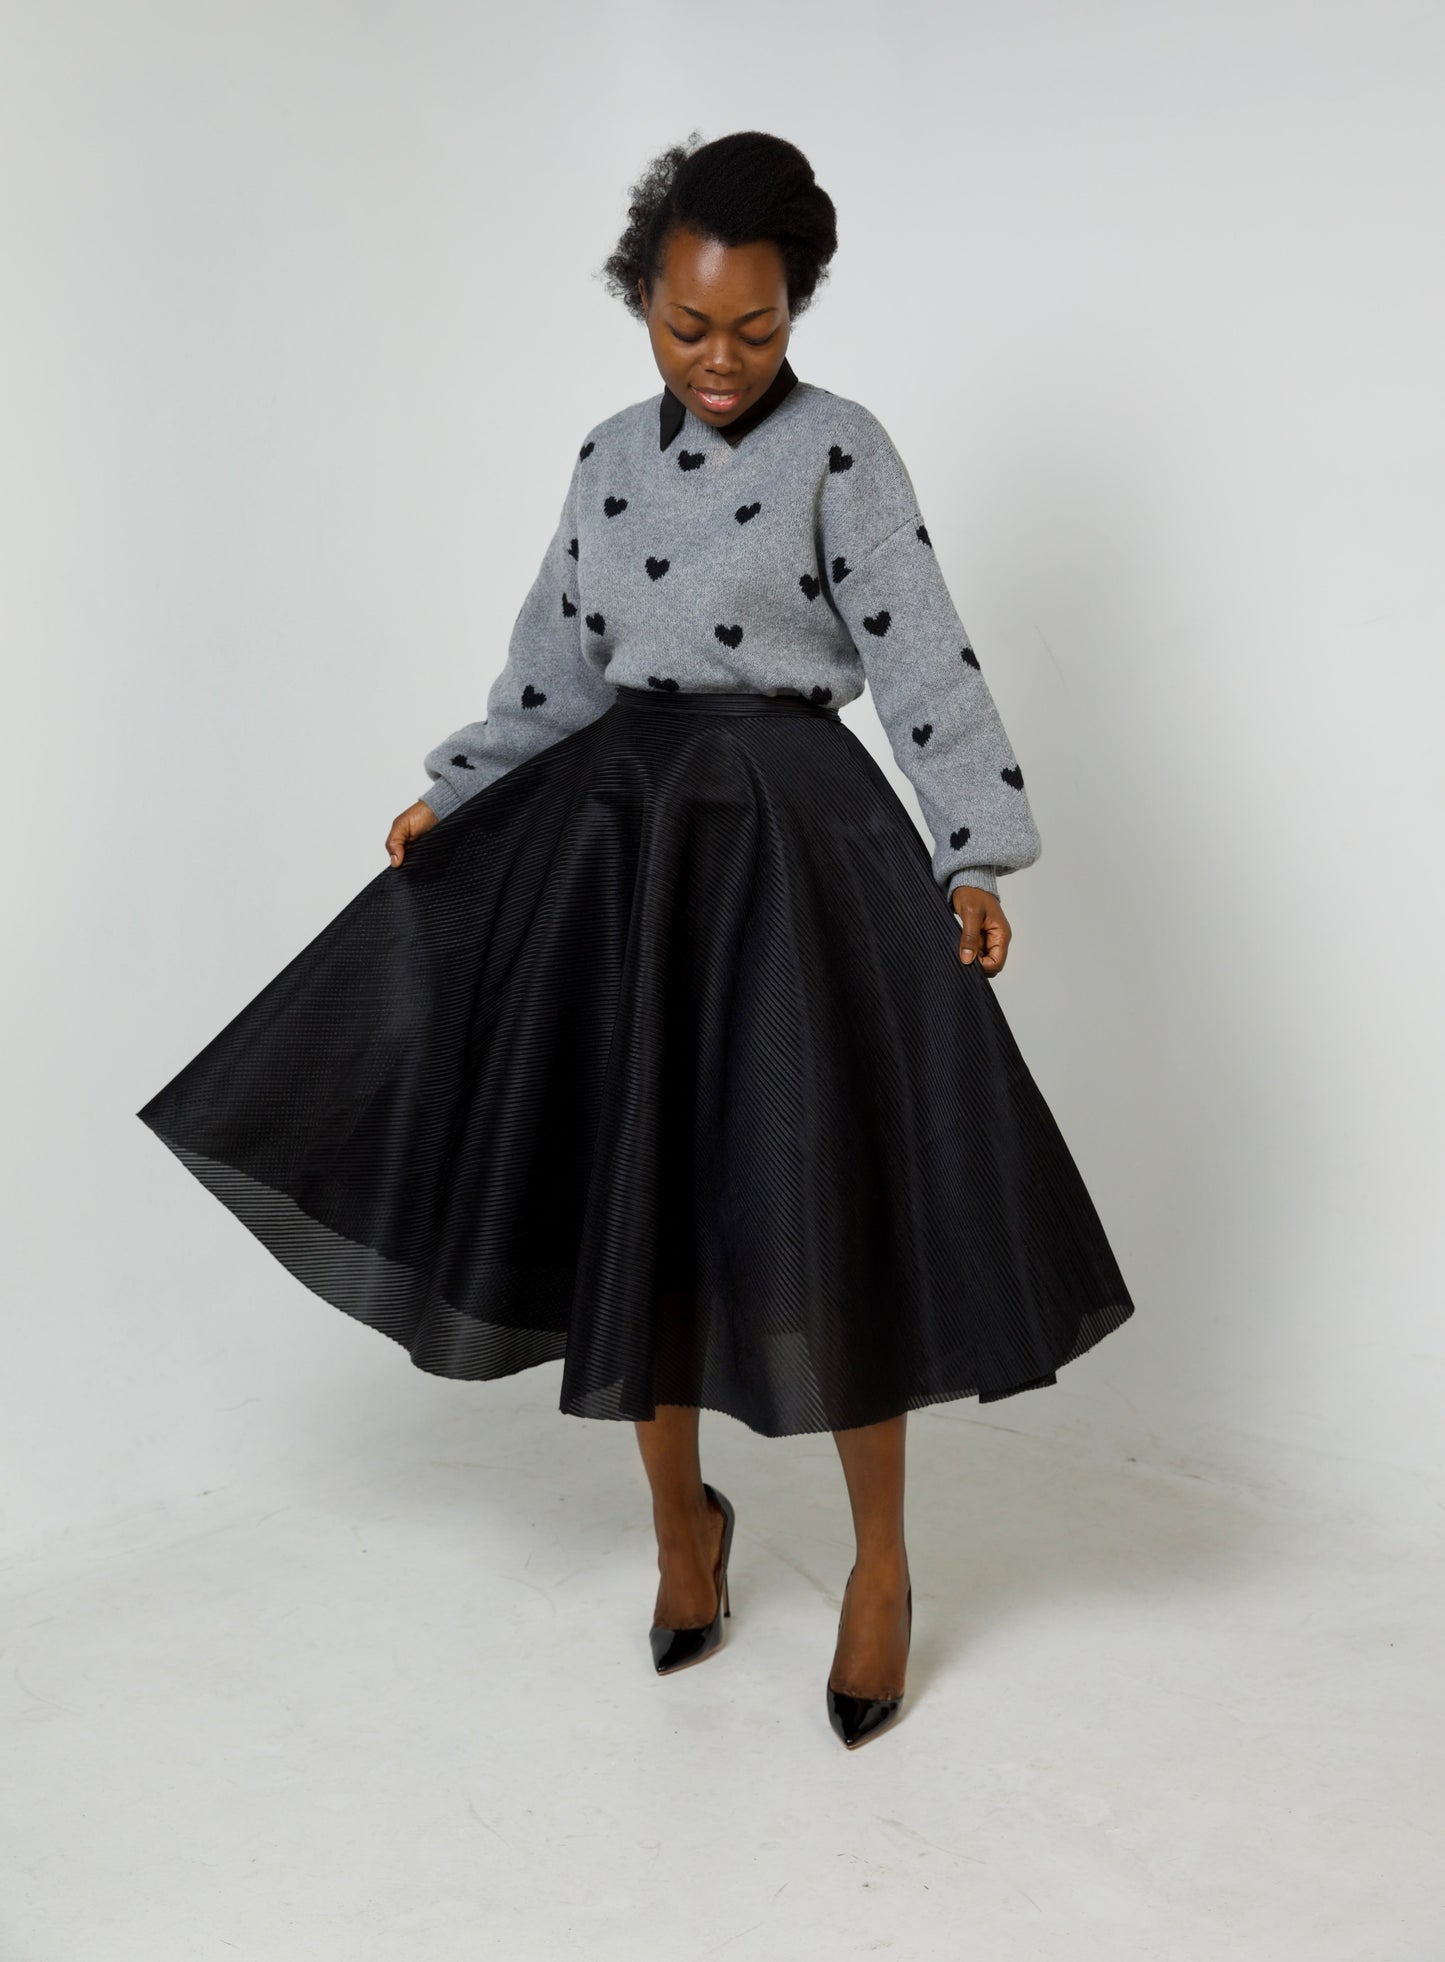 Ready To Ship - Flare Skirt